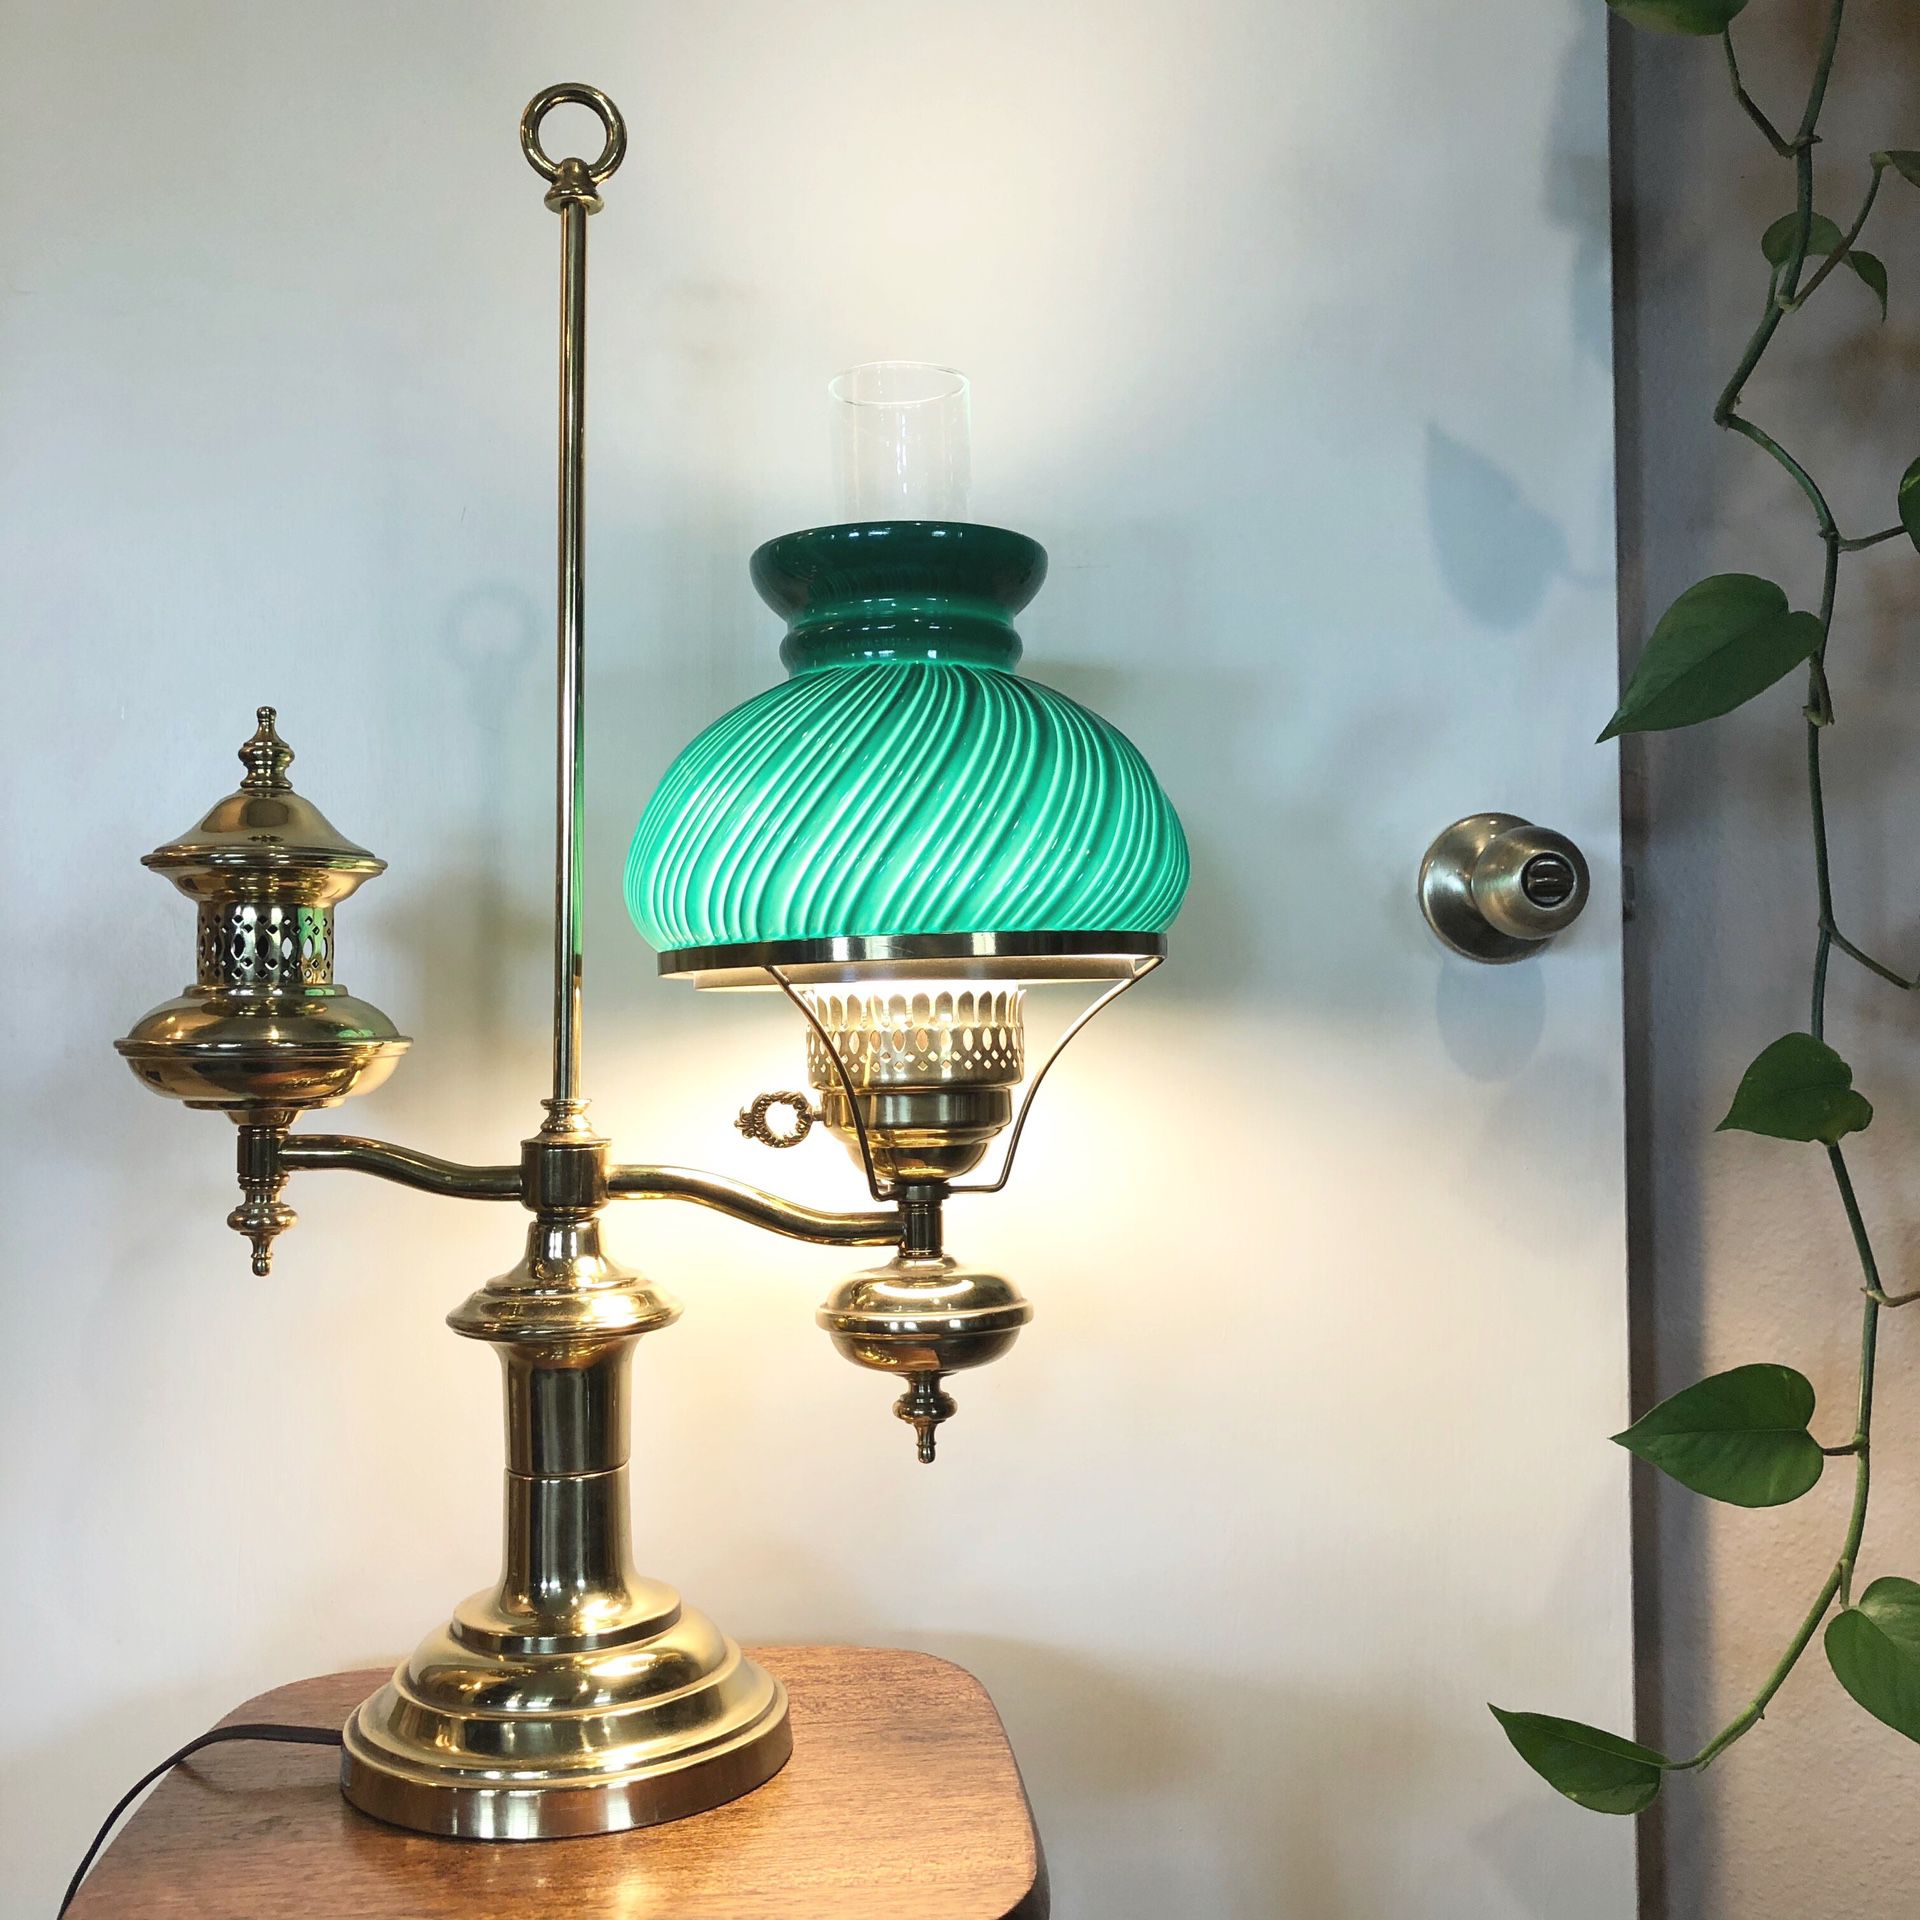 Antique Lamp with Green Glass Shade